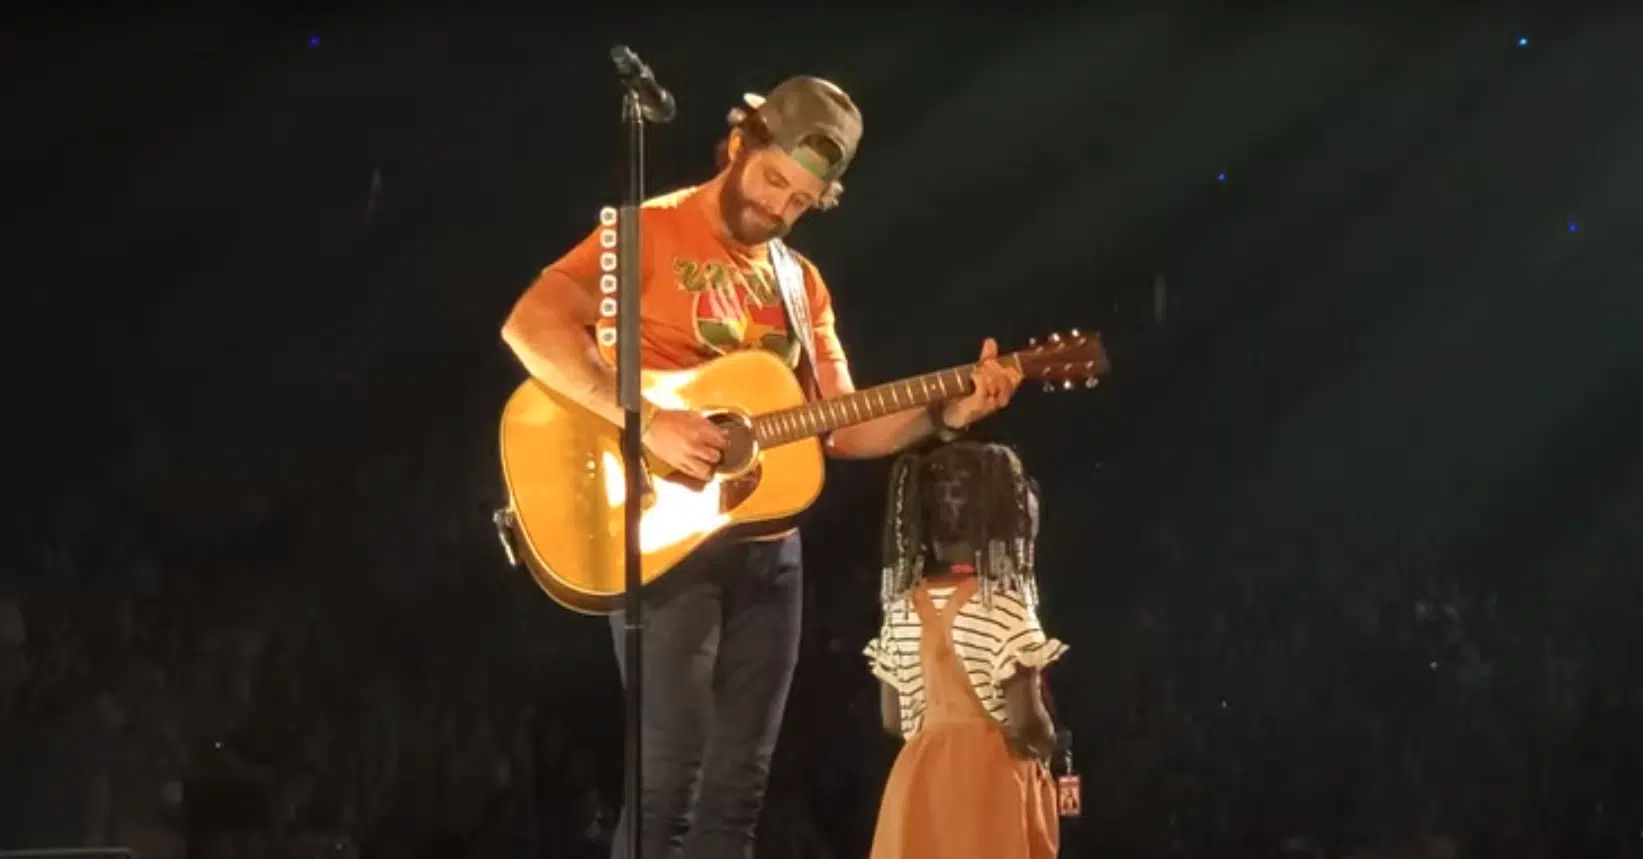 "To The Guys That Date My Girls" [WATCH] Thomas Rhett Sings a New Unreleased Song to His Daughter On Stage